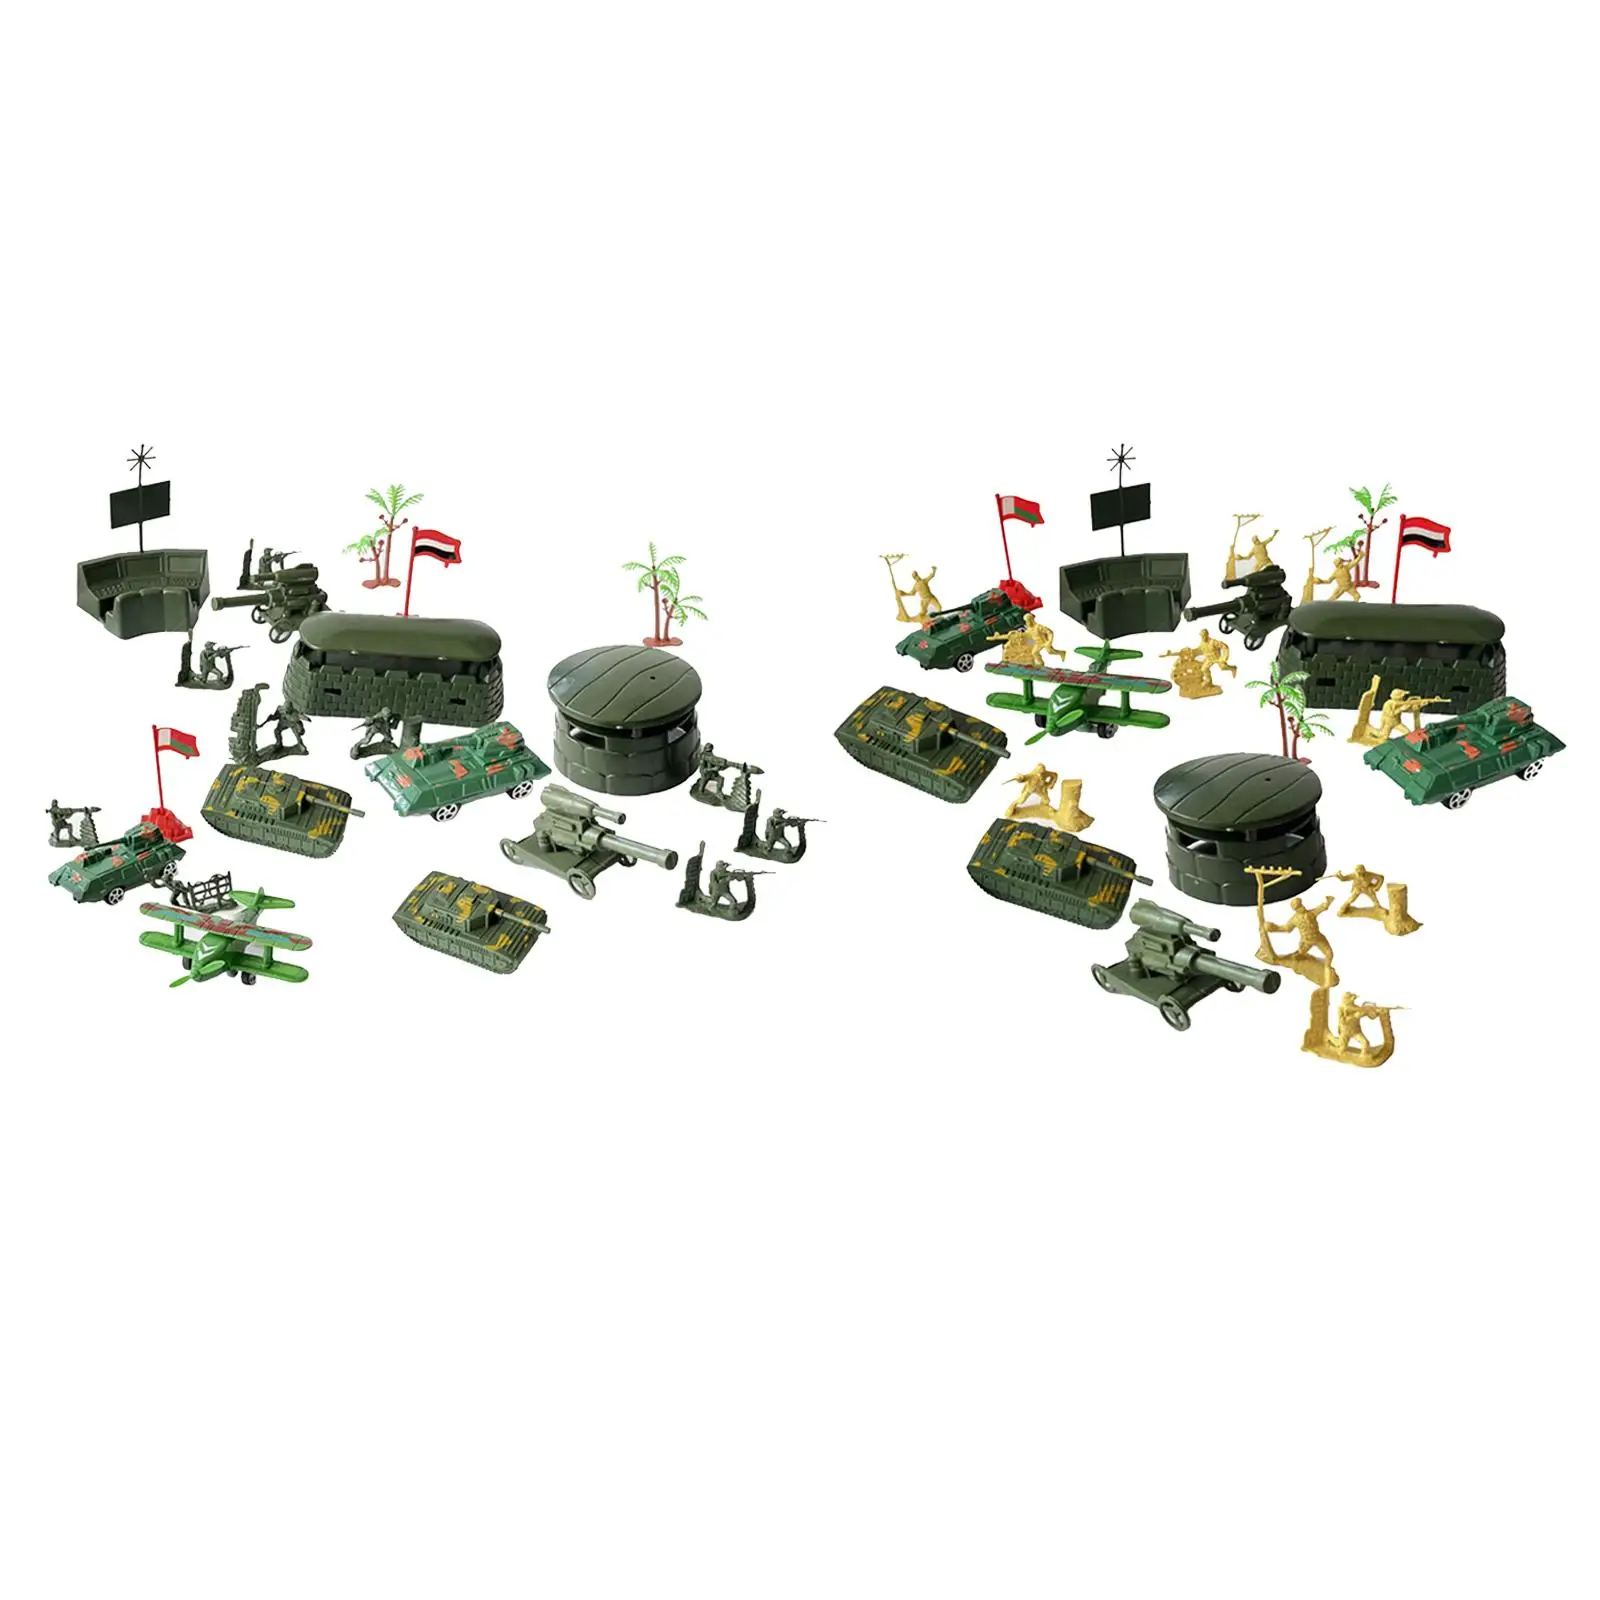 25 Pieces Miniatures Model Soldier Figures Toys Playset Diorama Model Men Figures Soldiers for Adults Kids Children Teens Boys